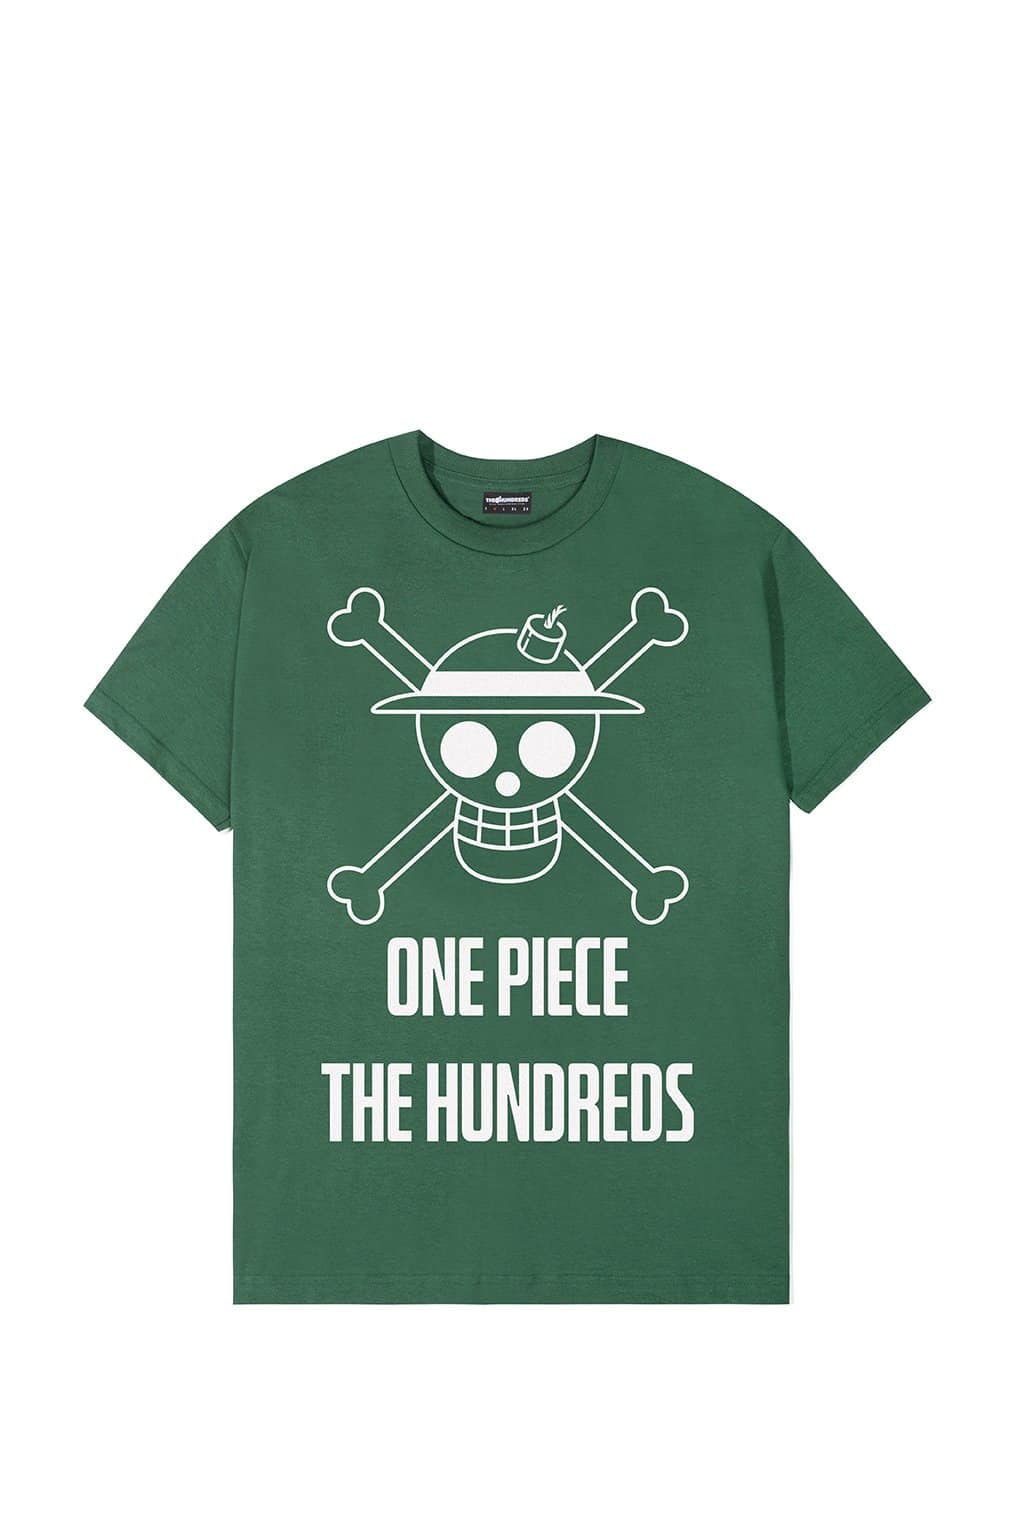 The Hundreds One Piece Jolly Roger Tshirt